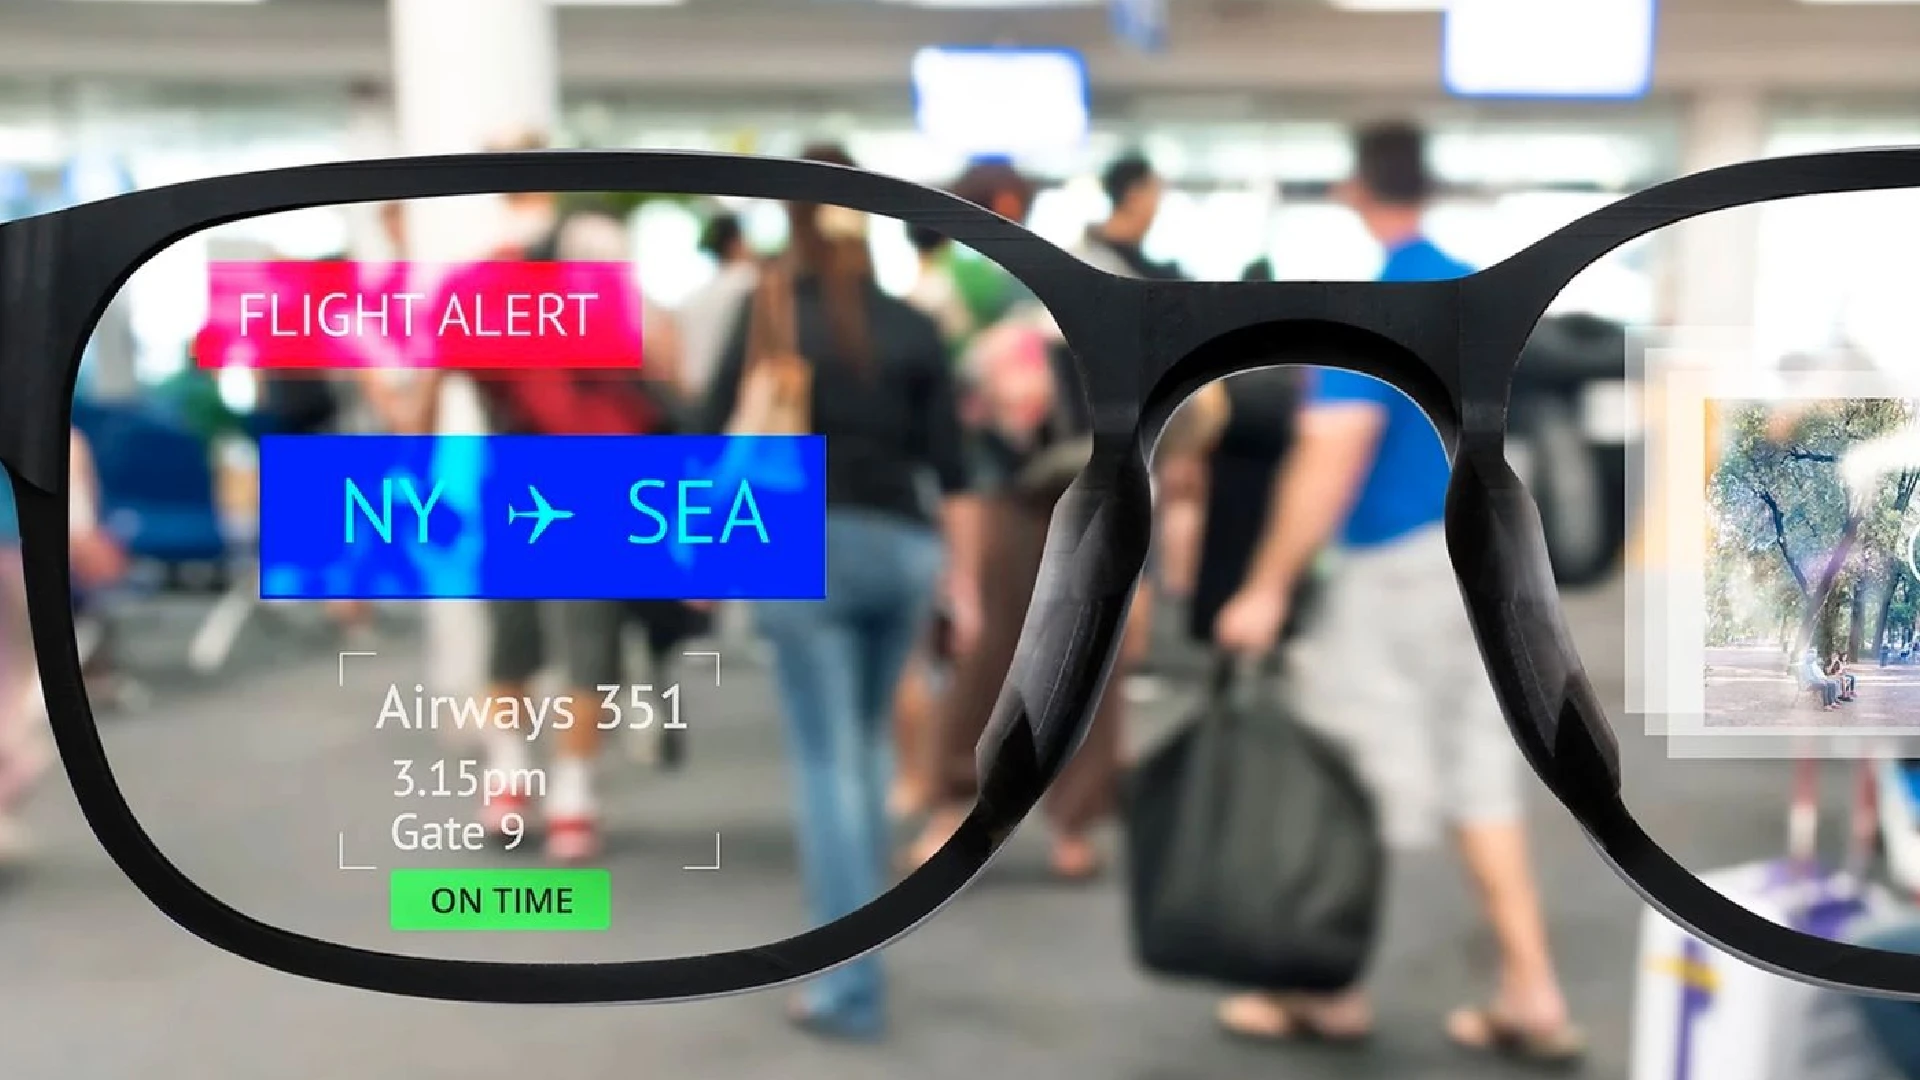 Google’s recent acquisition confirms its growing interest in AR hardware